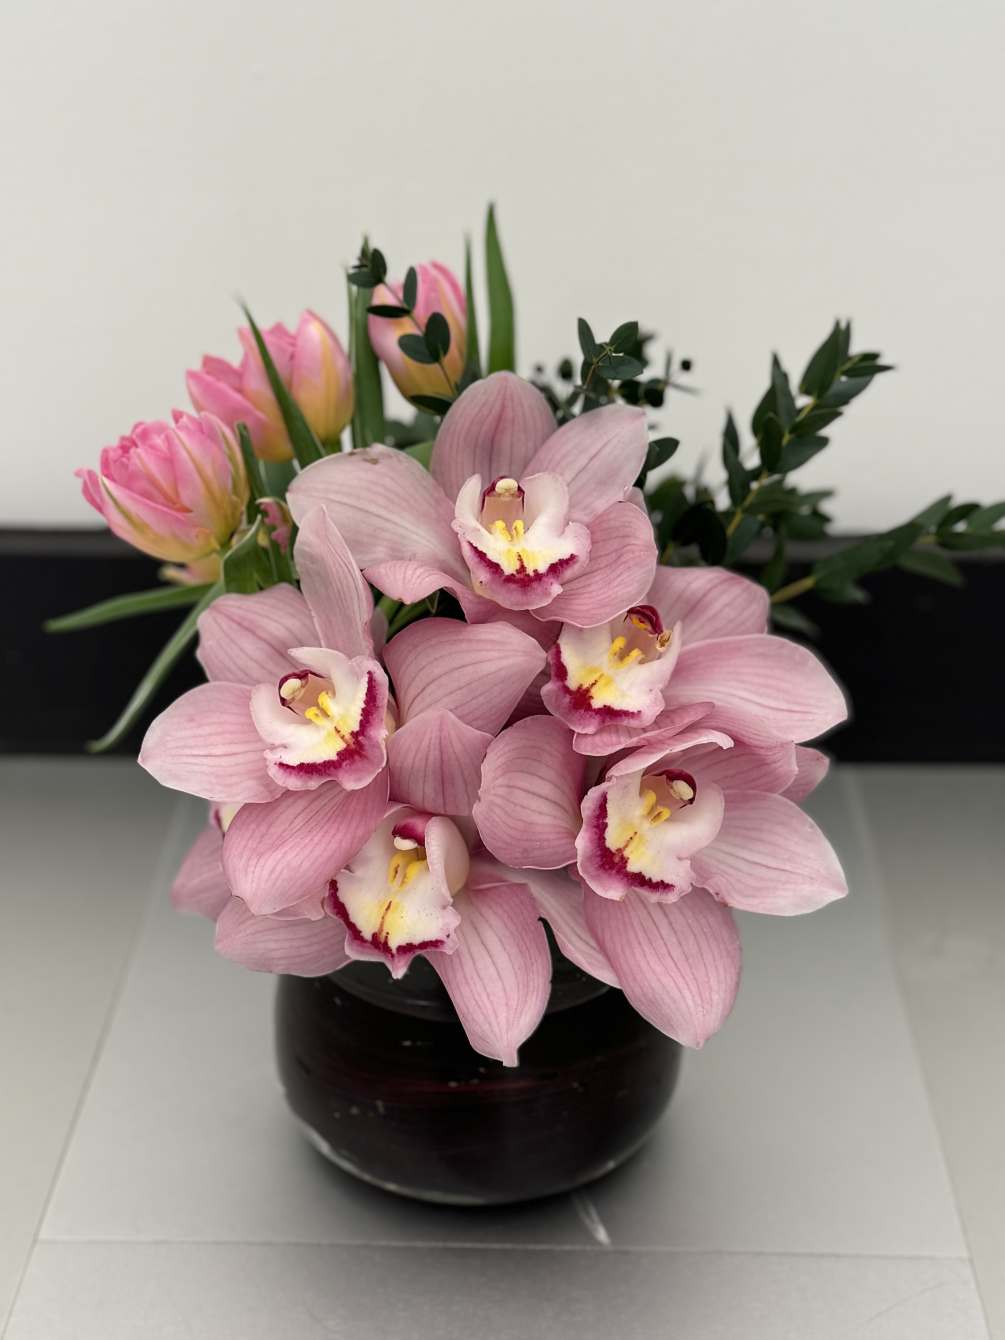 Cymbidium Orchids and Tulips in a vase